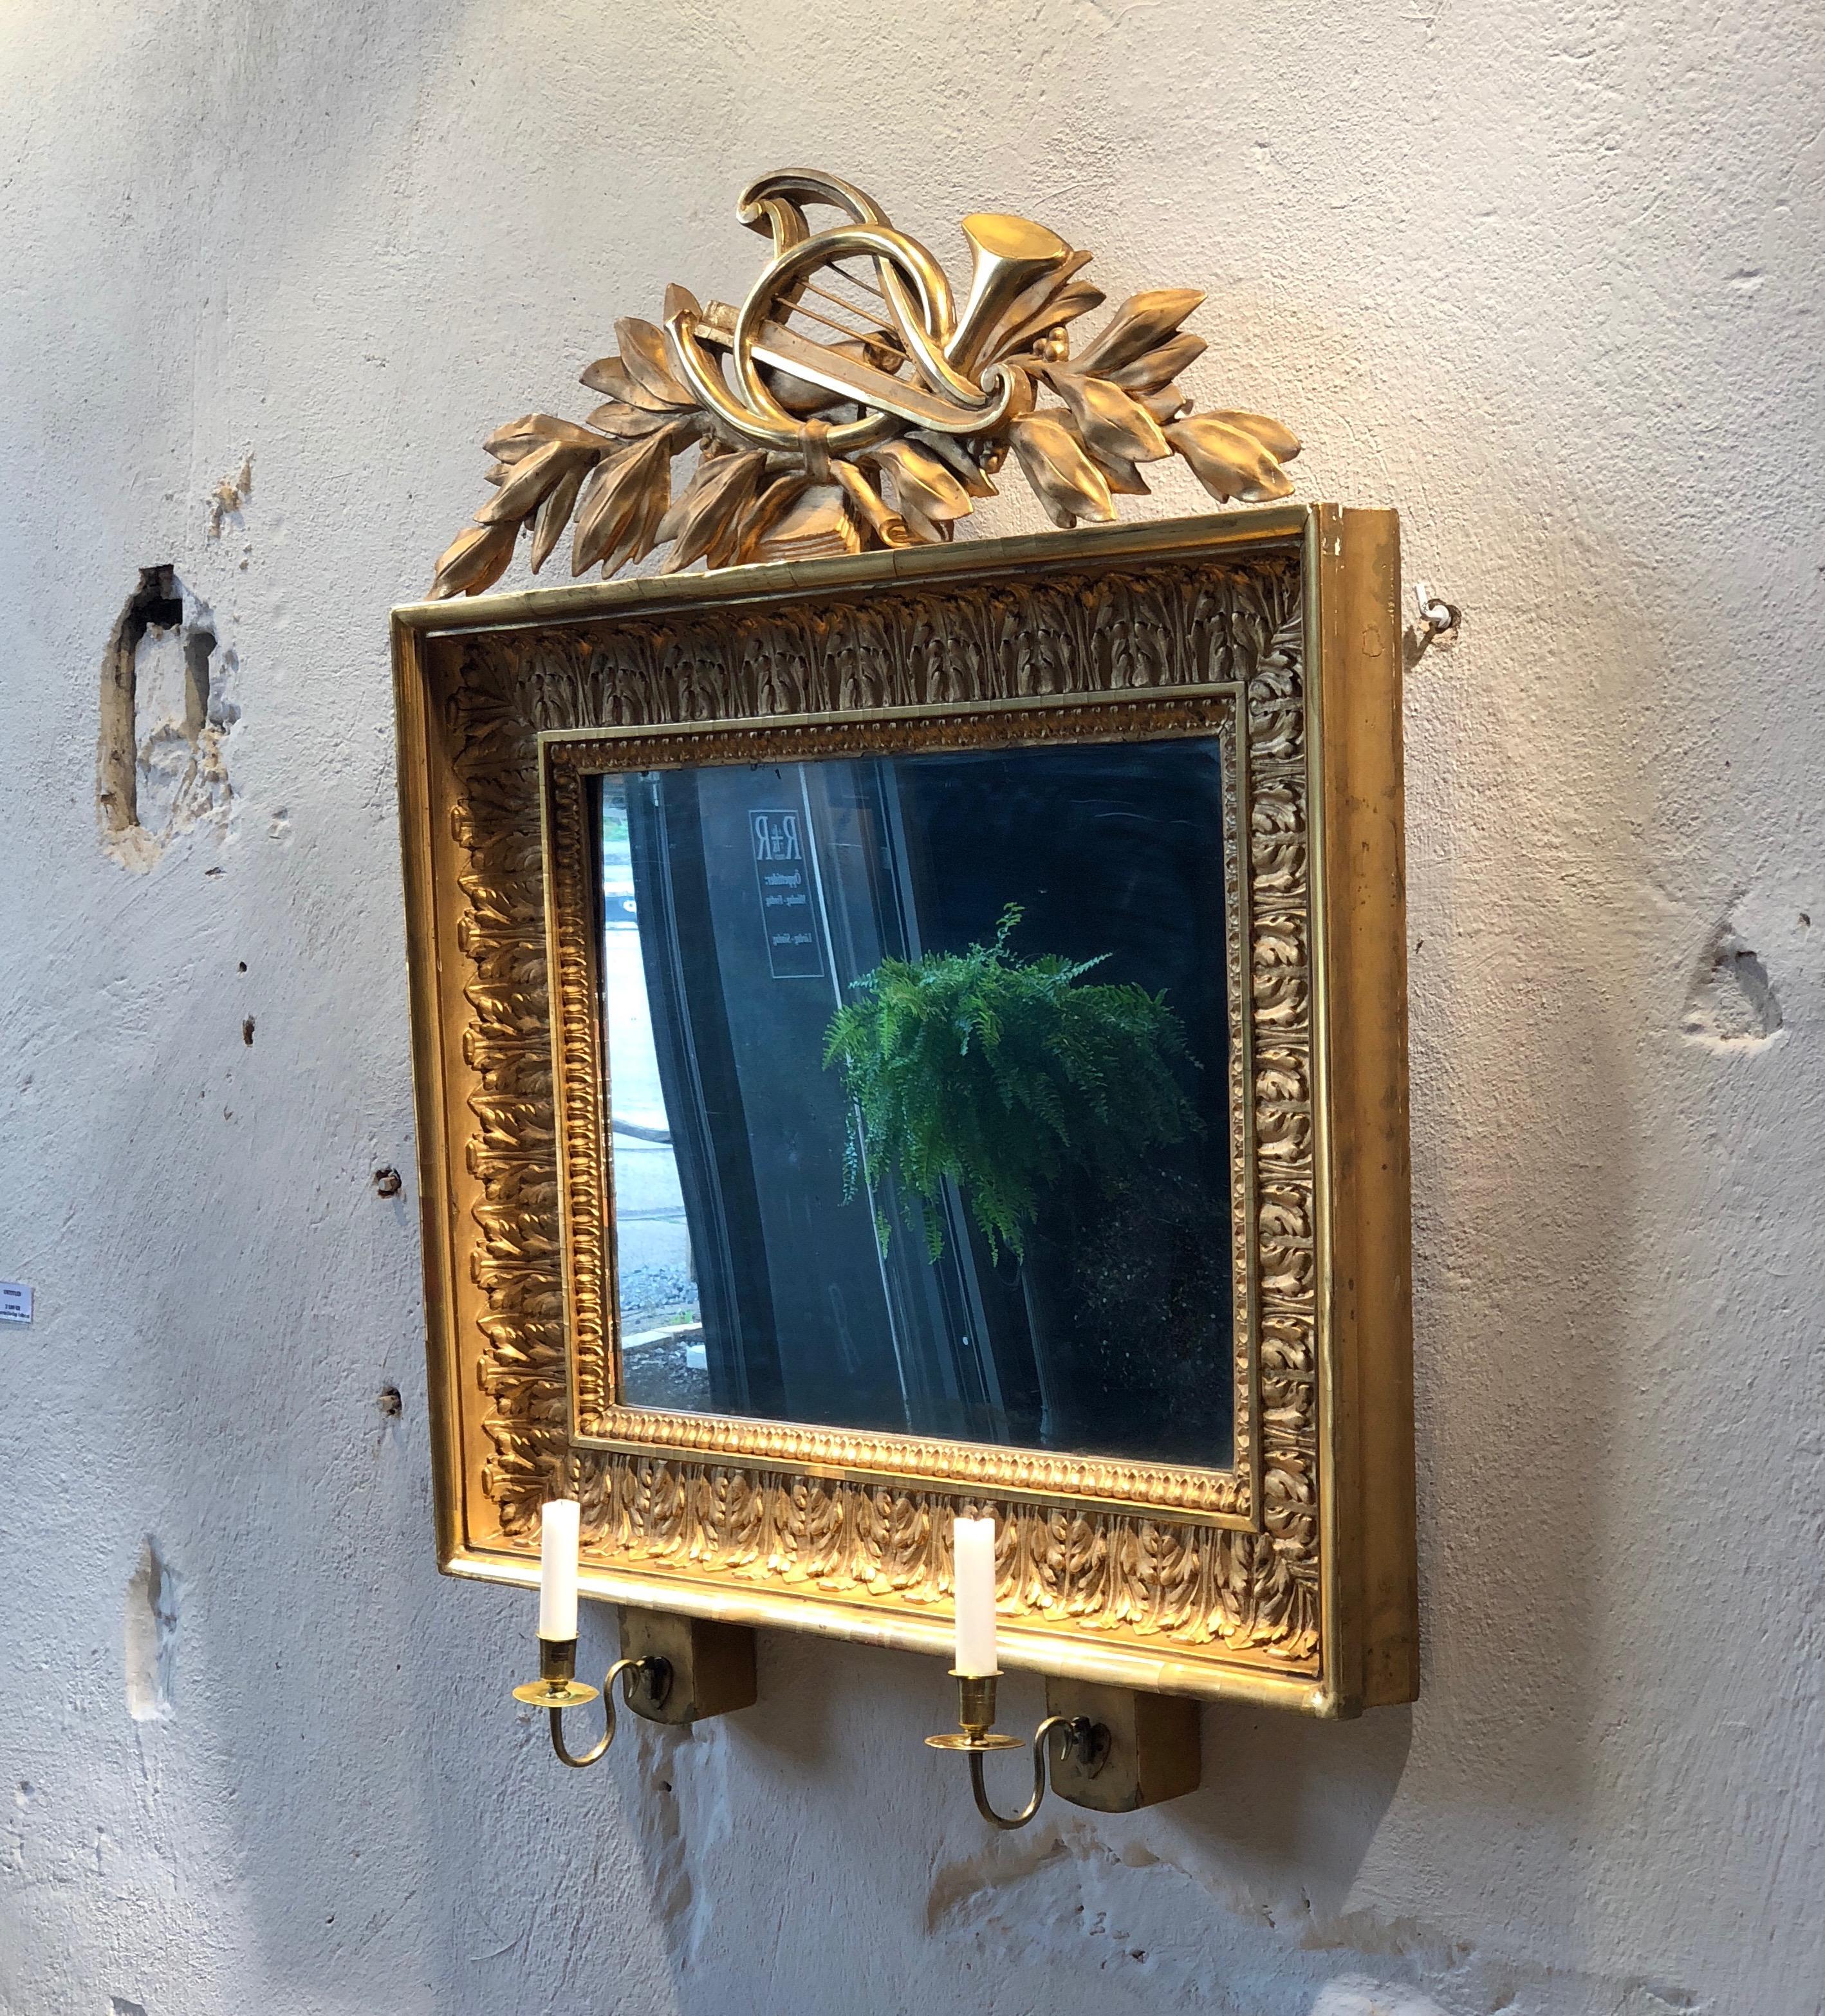 A Swedish Empire, mirrored wall sconce in a gilded frame with carved decorations showing trumpet and harp. Holders for two candles in brass.
Original gild and original mirror glass.